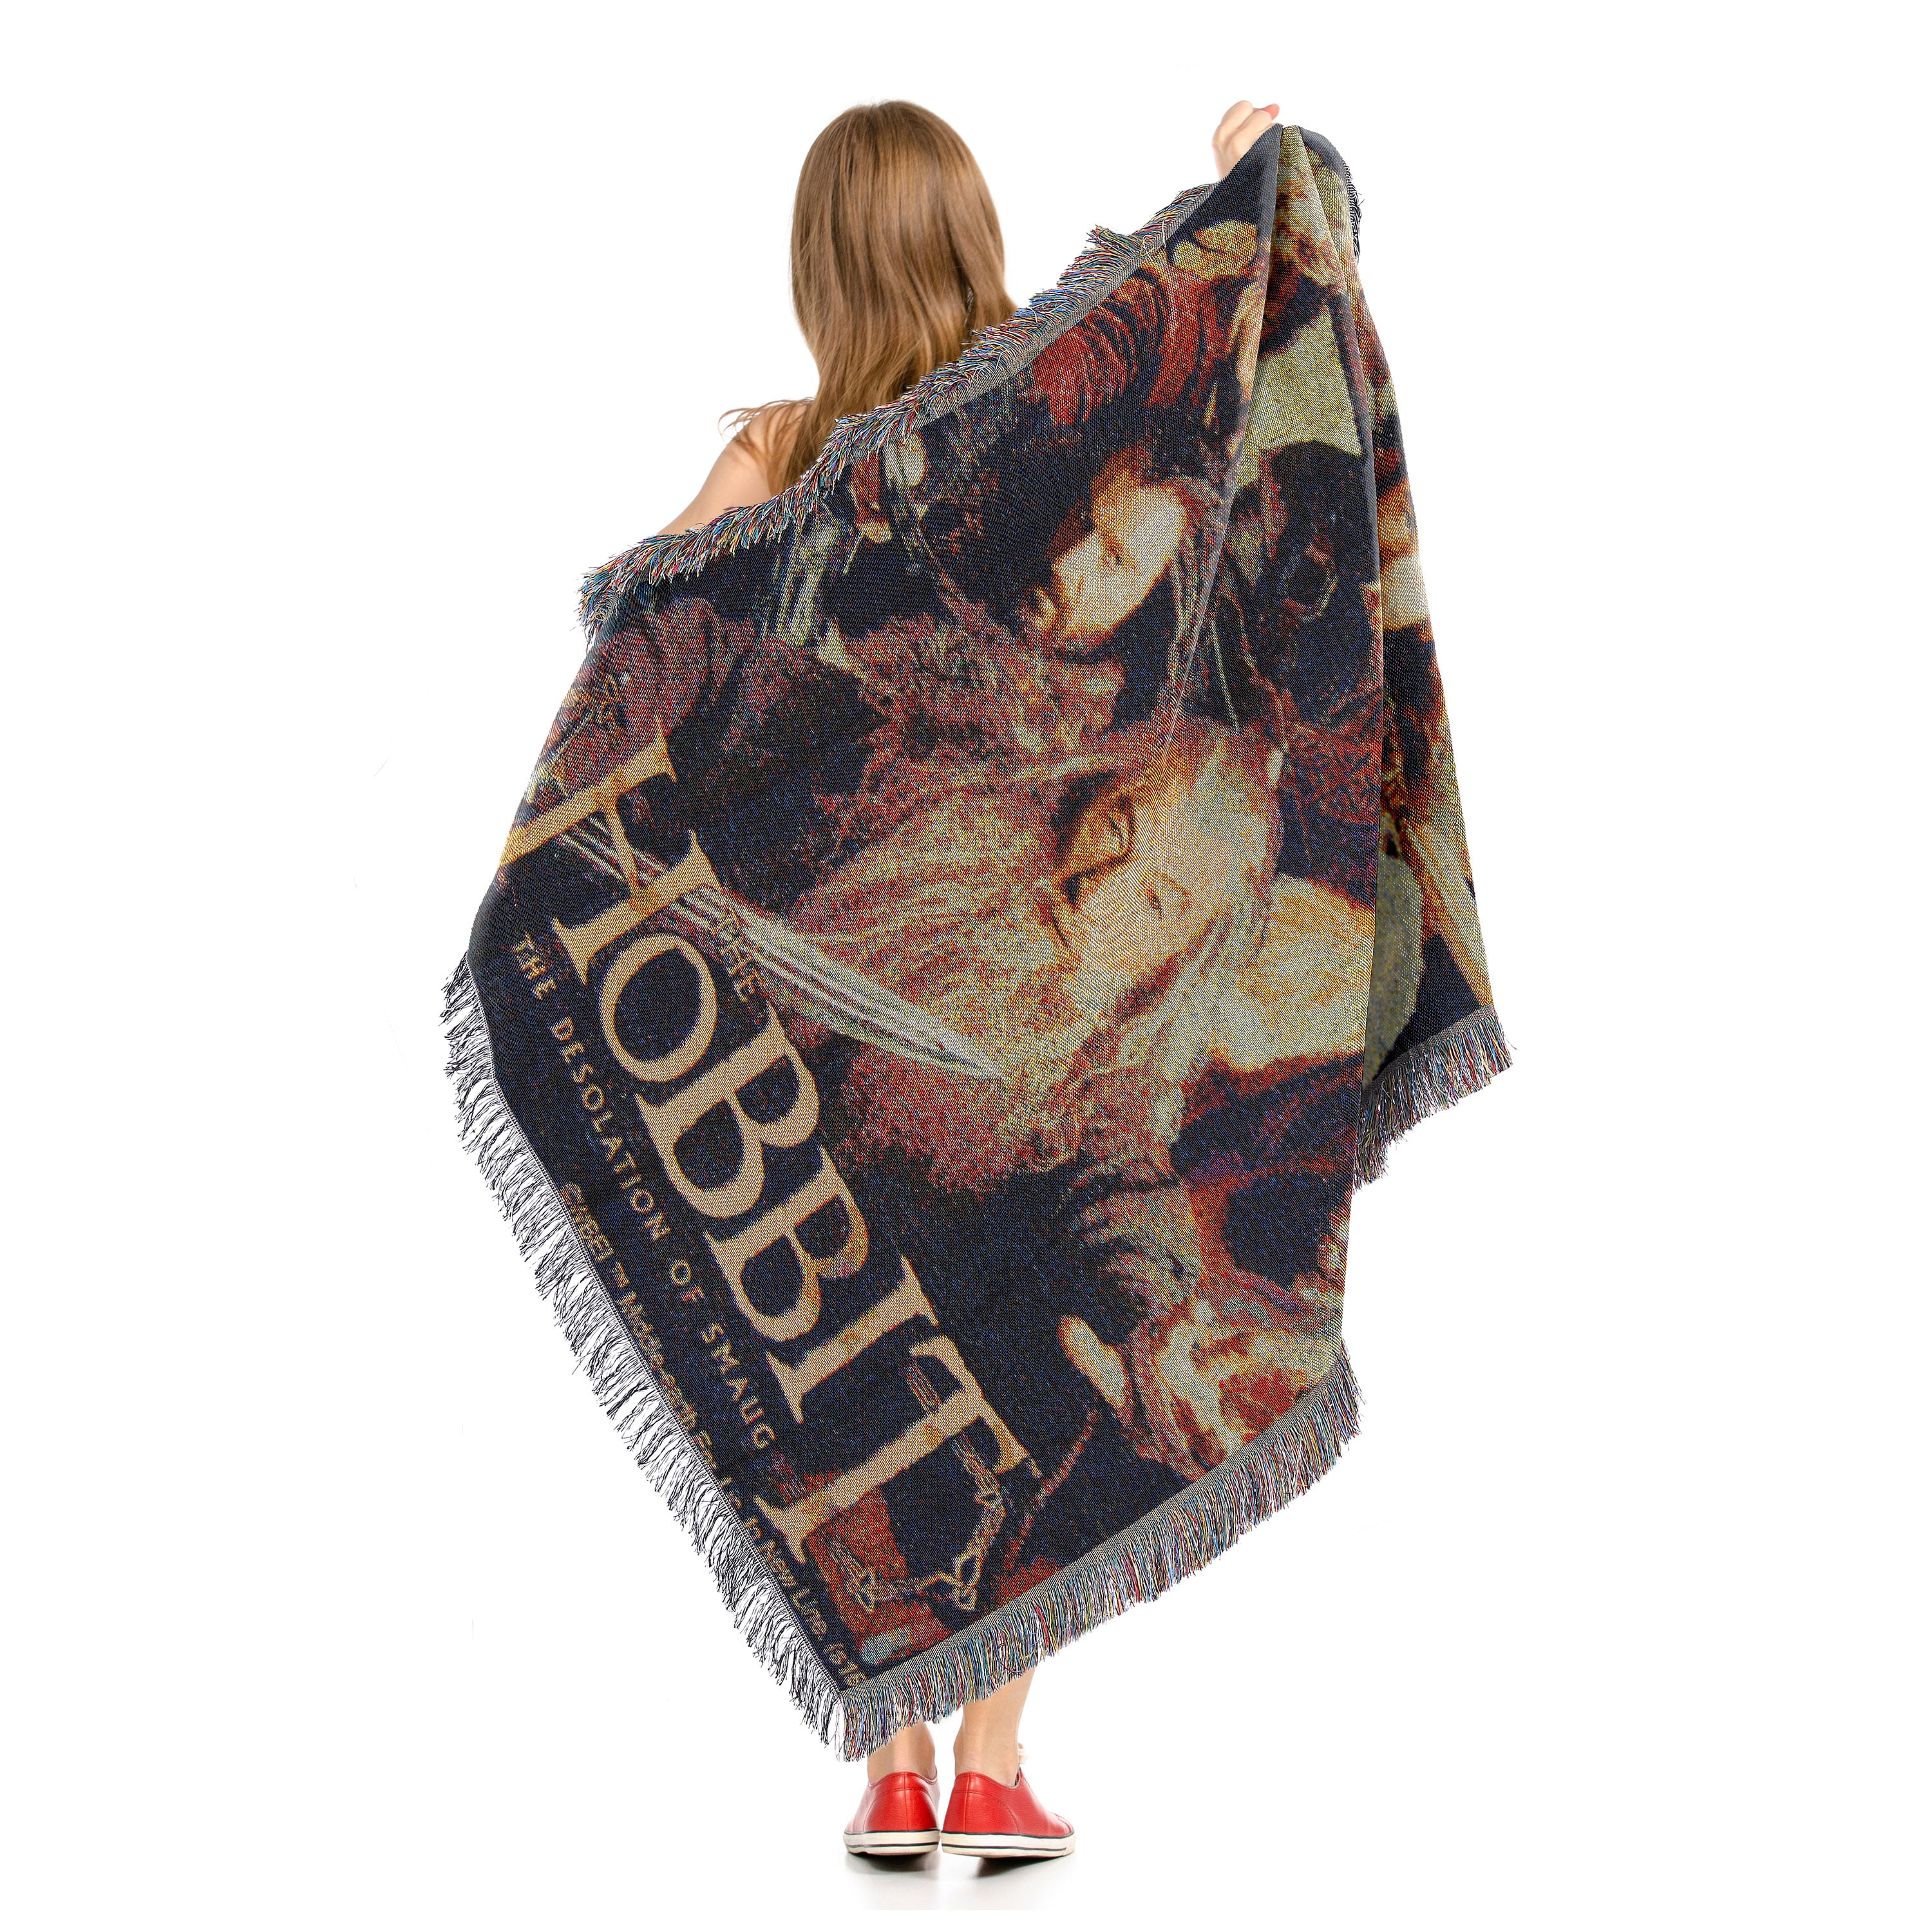 Lord of The Rings - The Hobbit Woven Tapestry Throw Blanket 48